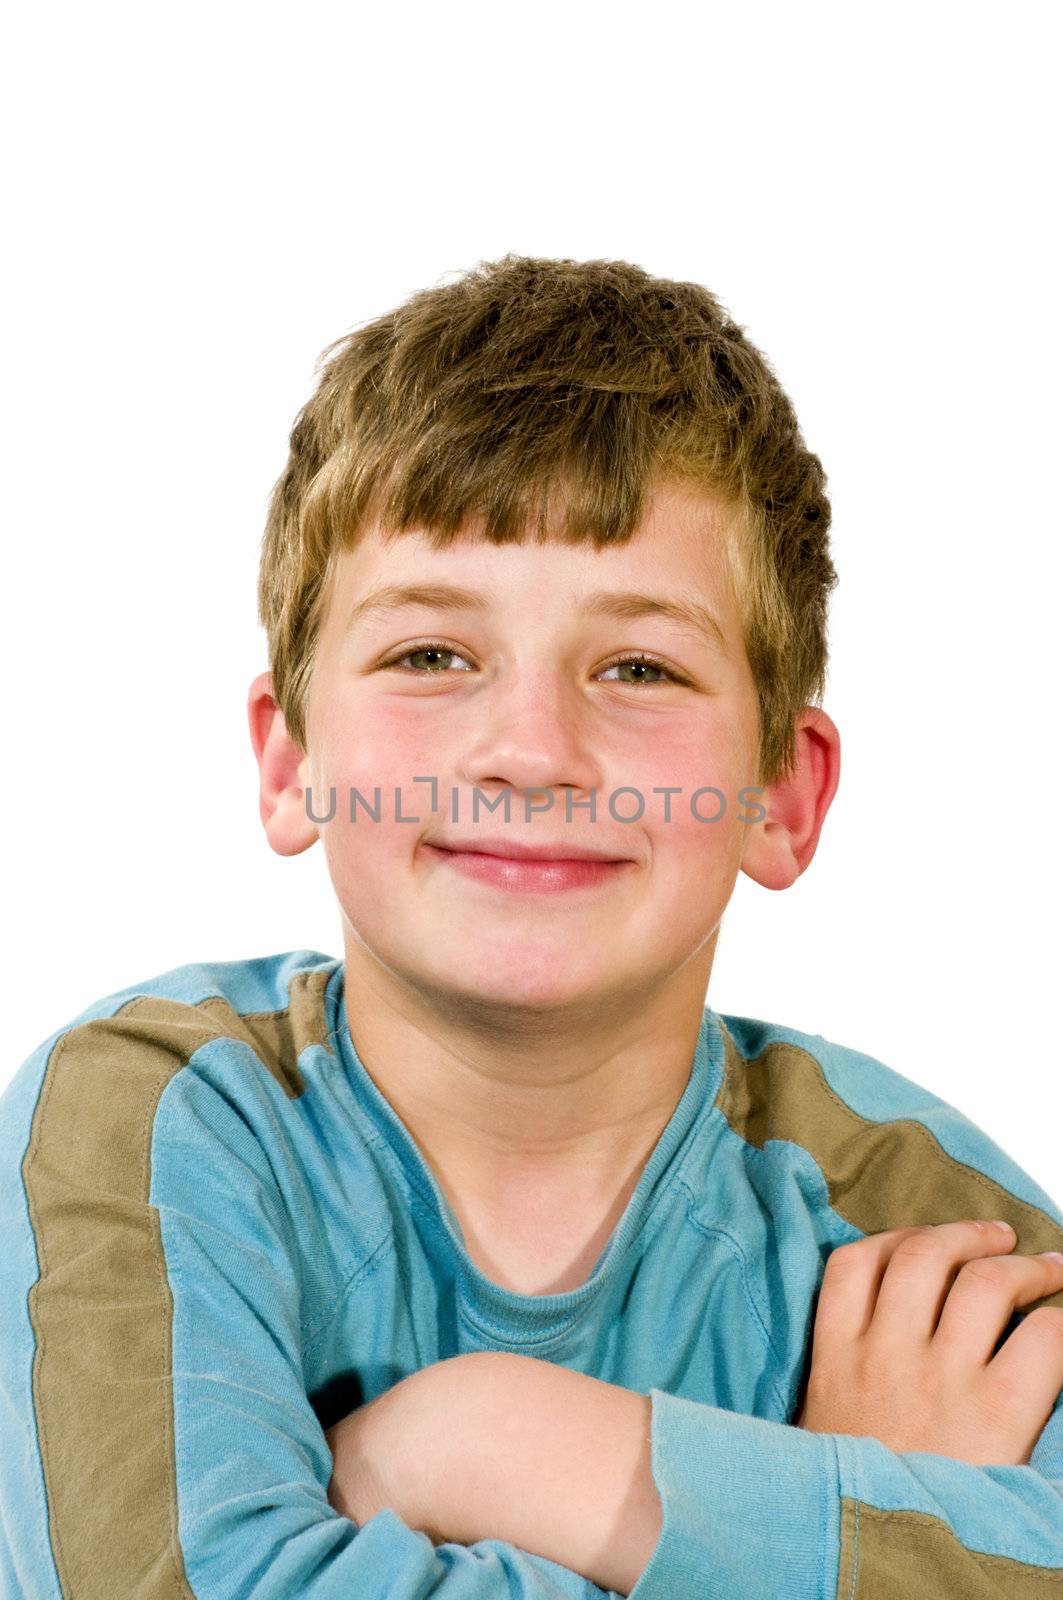 
	
Portrait of smiling boy in a green jacket on a white background